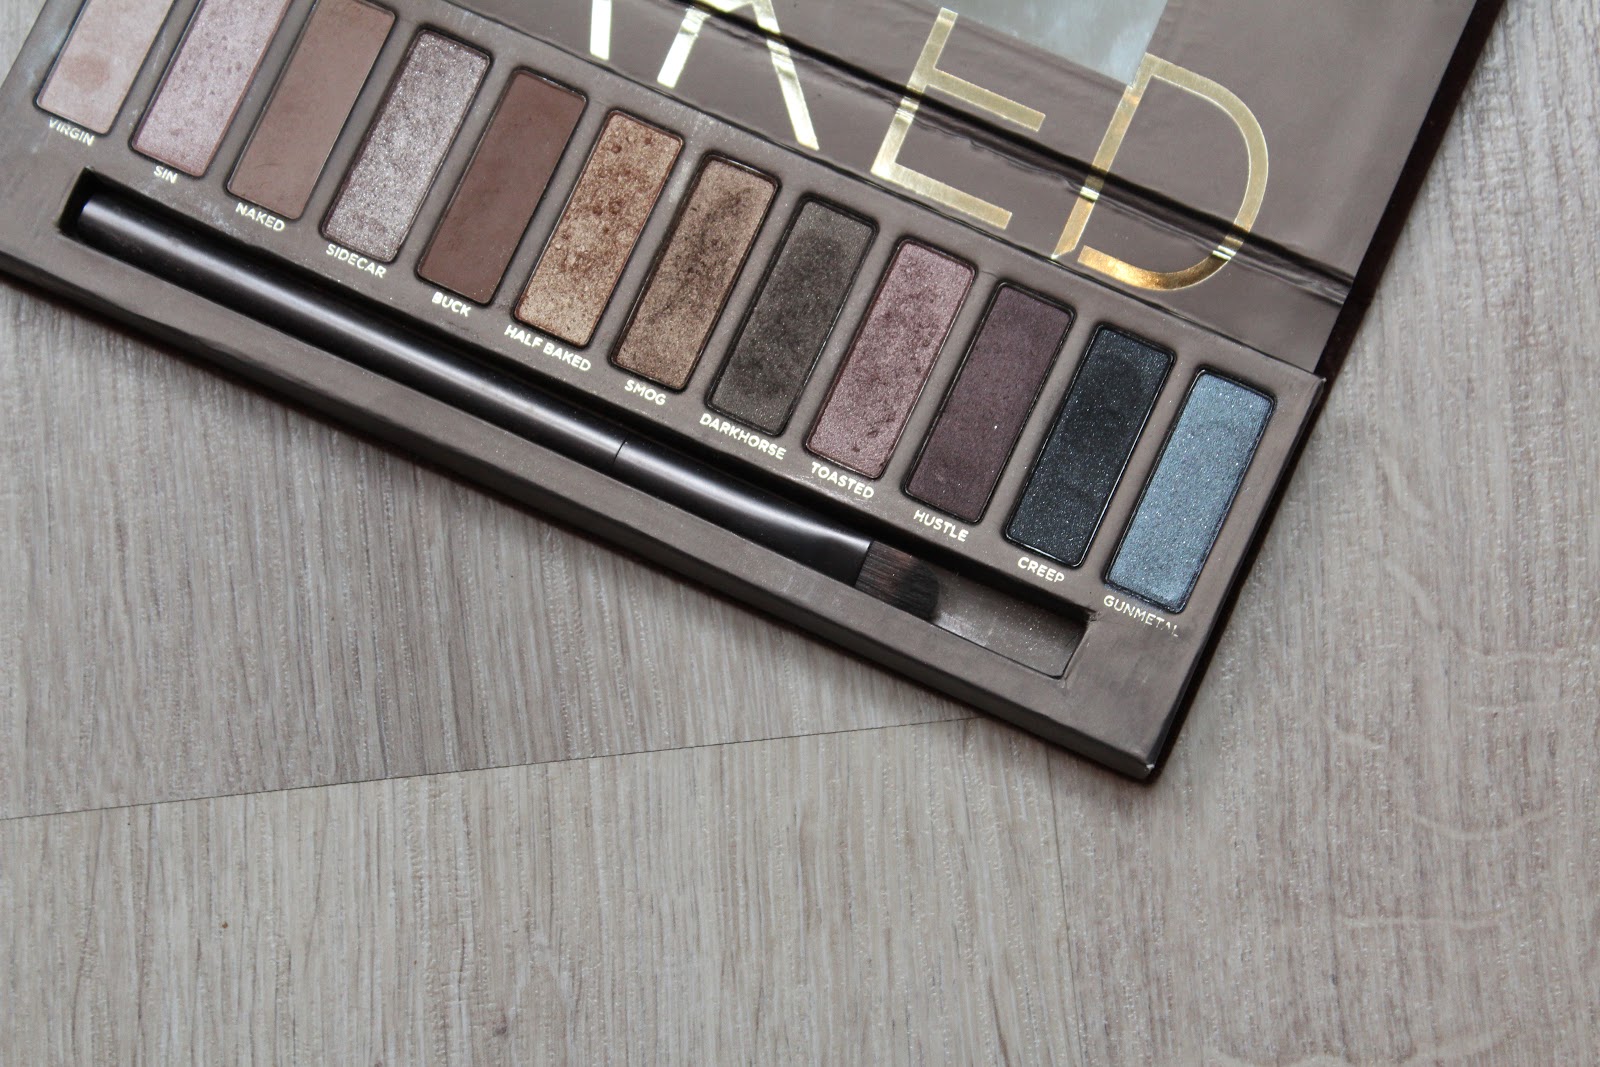 Naked Palette: Look 1 - Lily Pebbles